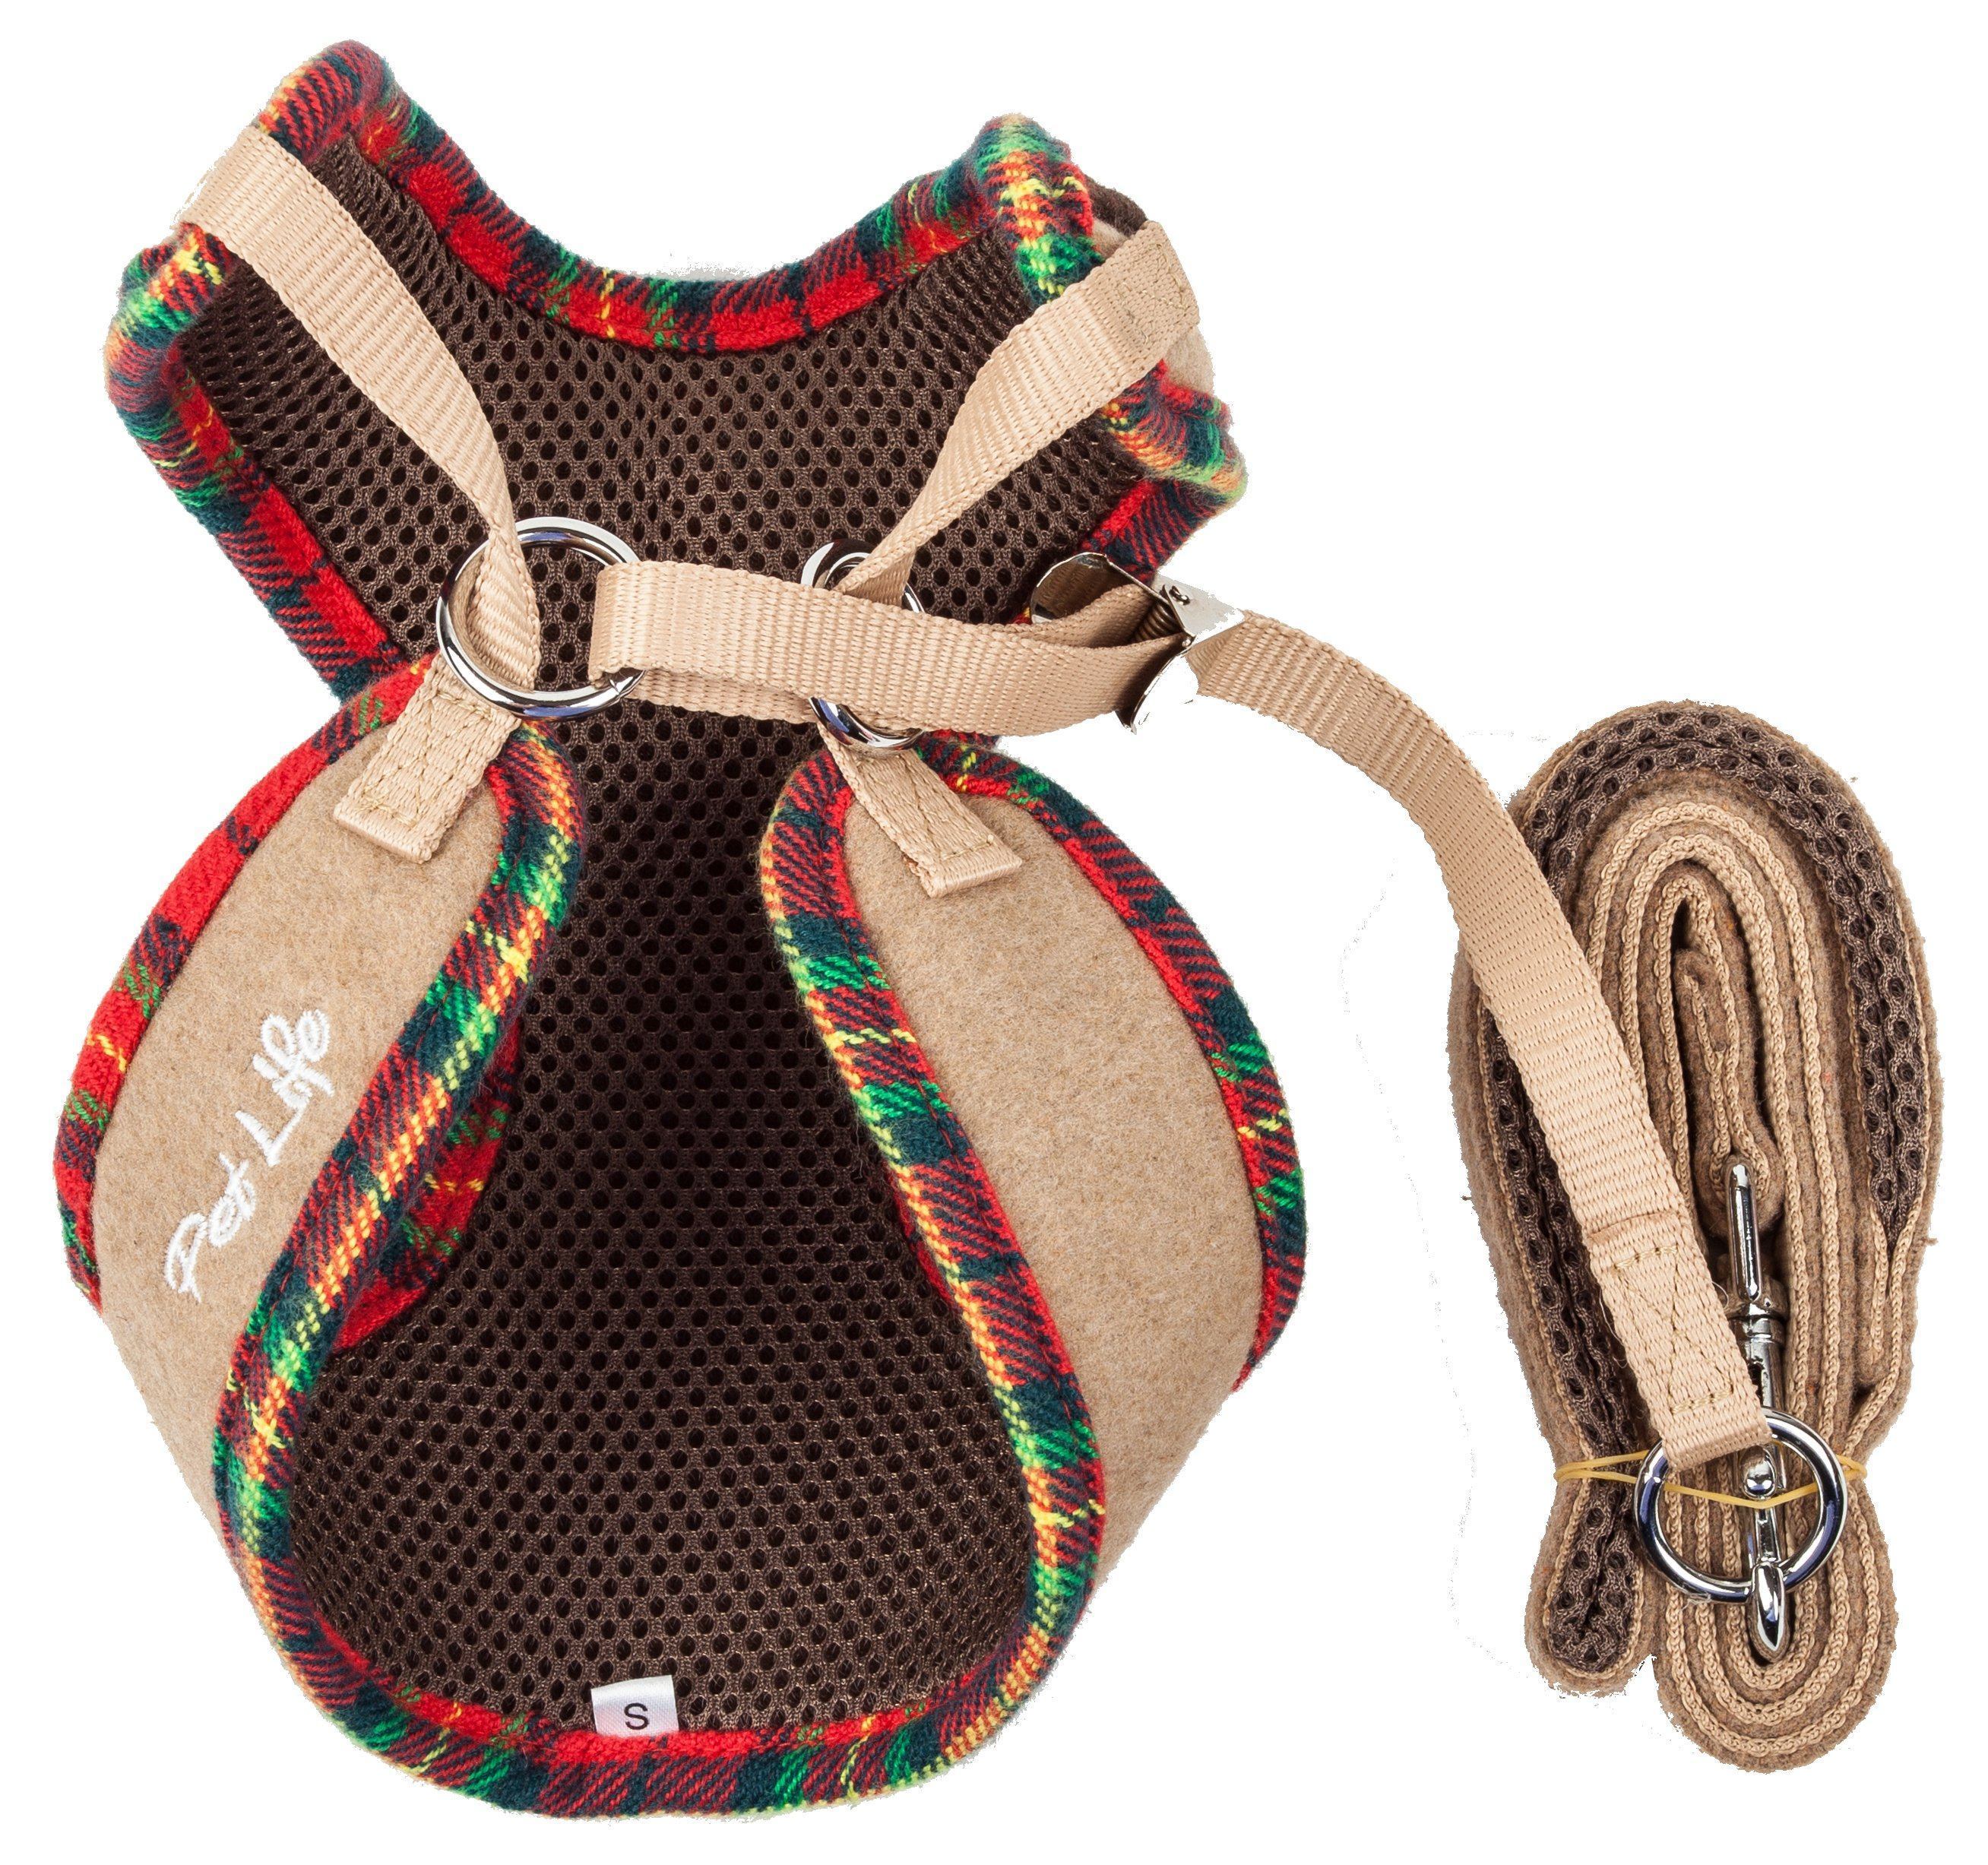 Pet Life ® Luxe 'Dapperbone' 2-In-1 Adjustable Fashion Dog Harness and Leash  